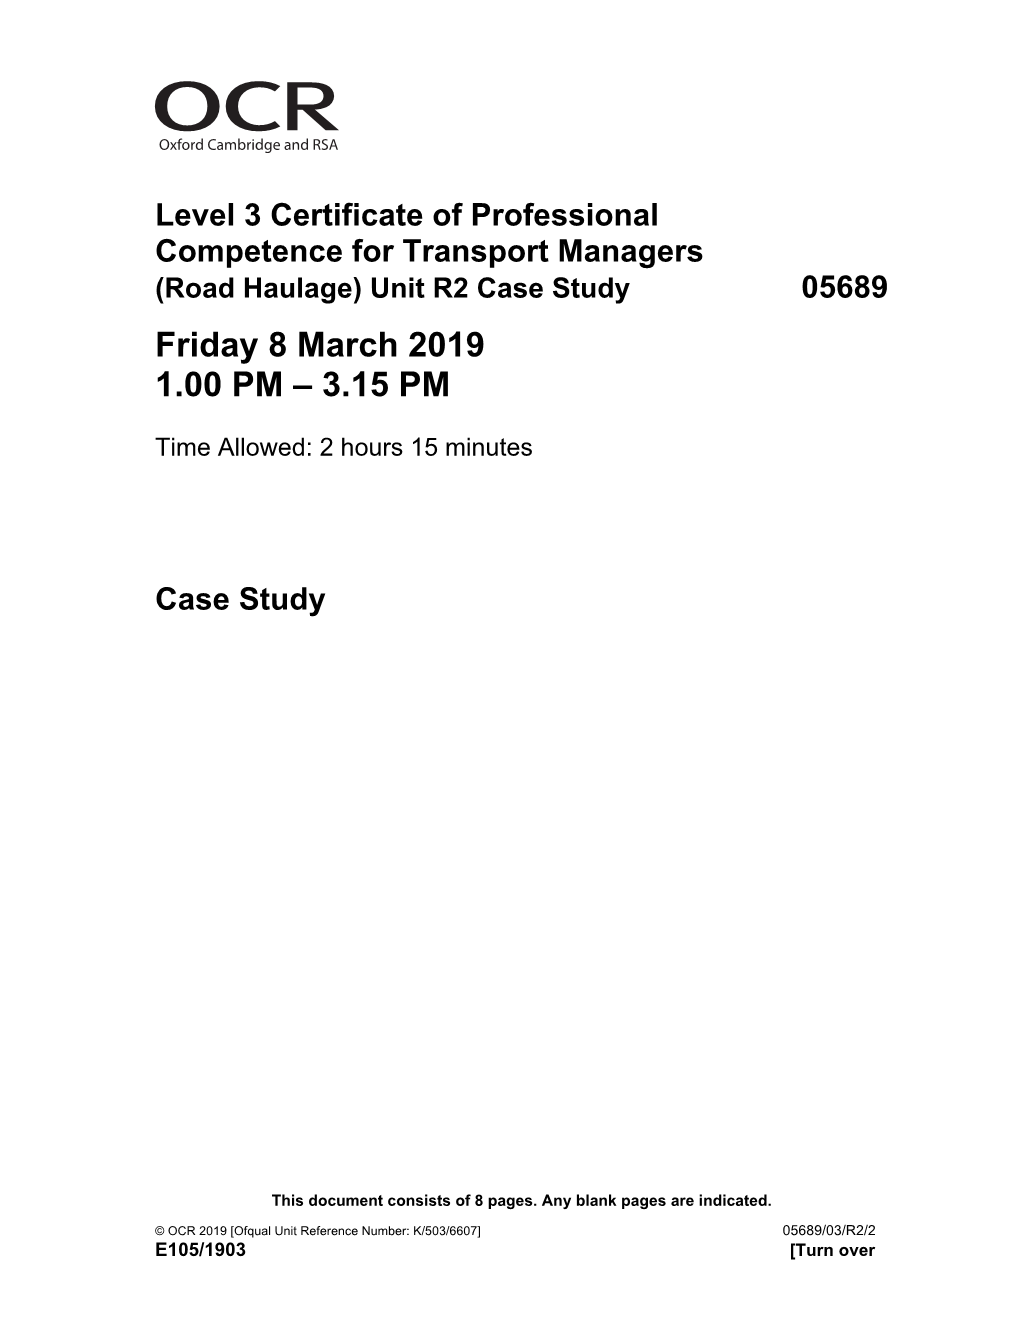 Case Study 05689 Friday 8 March 2019 1.00 PM – 3.15 PM